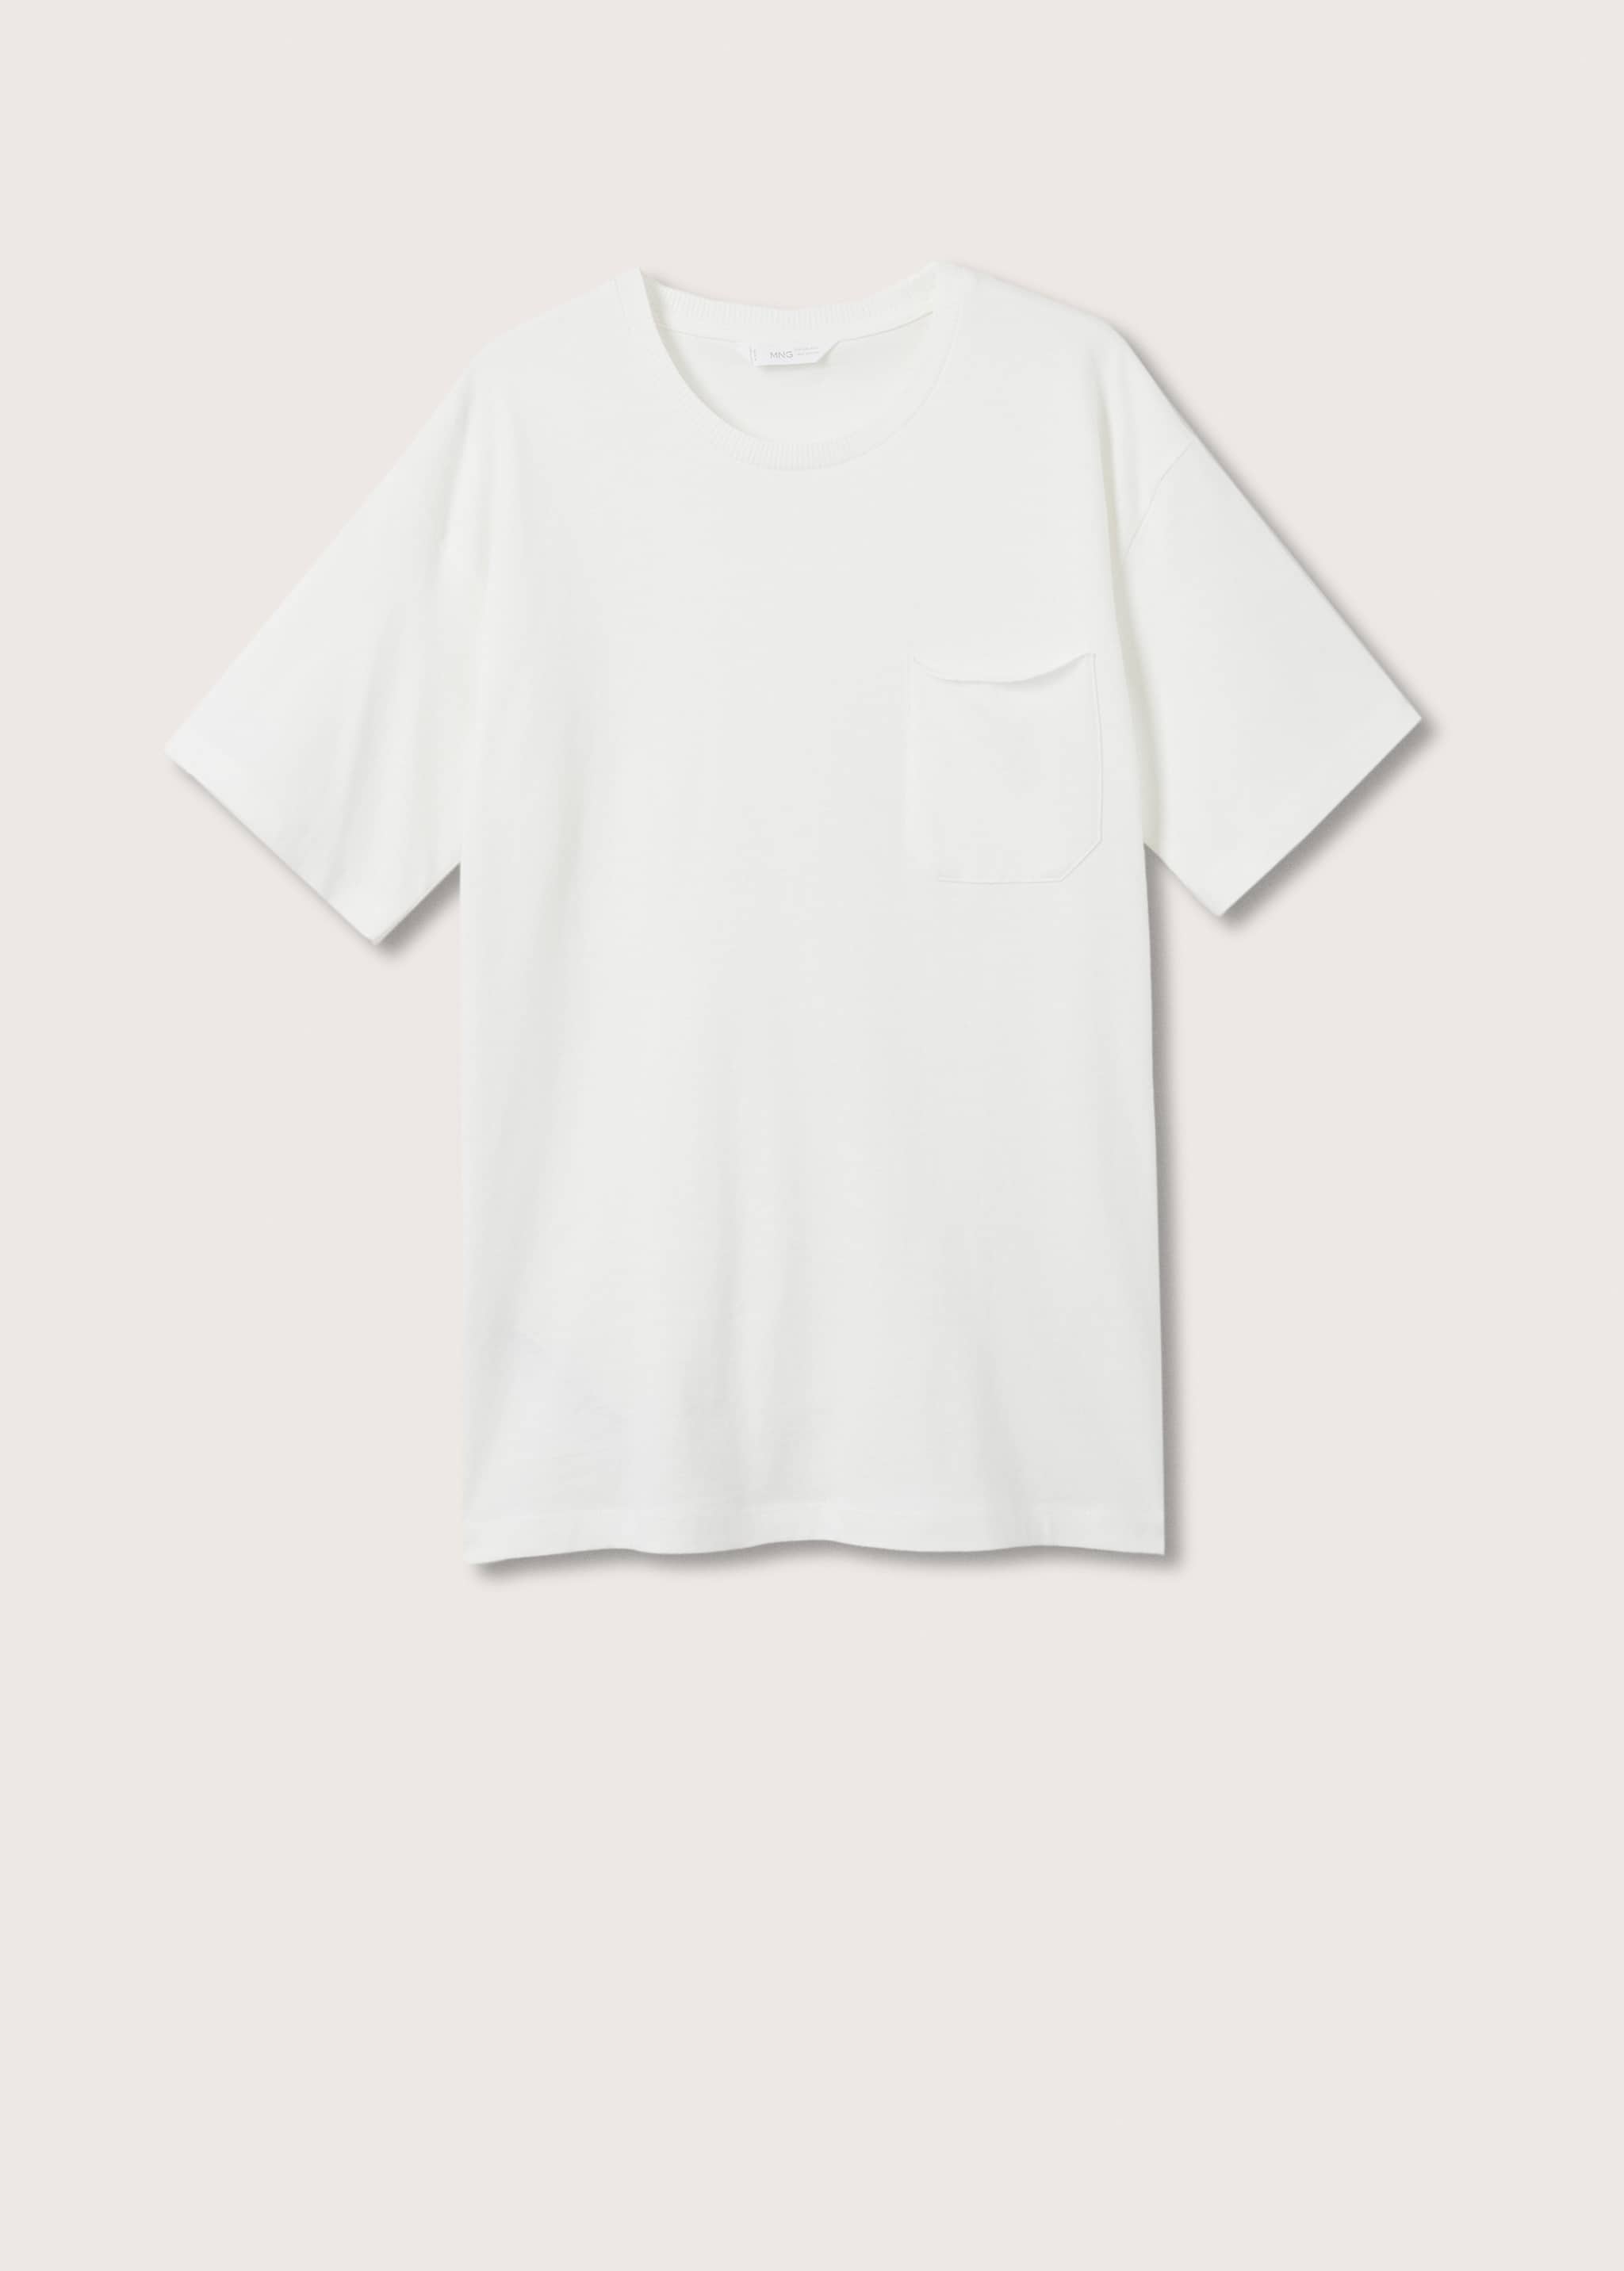 Pocket cotton T-shirt - Article without model